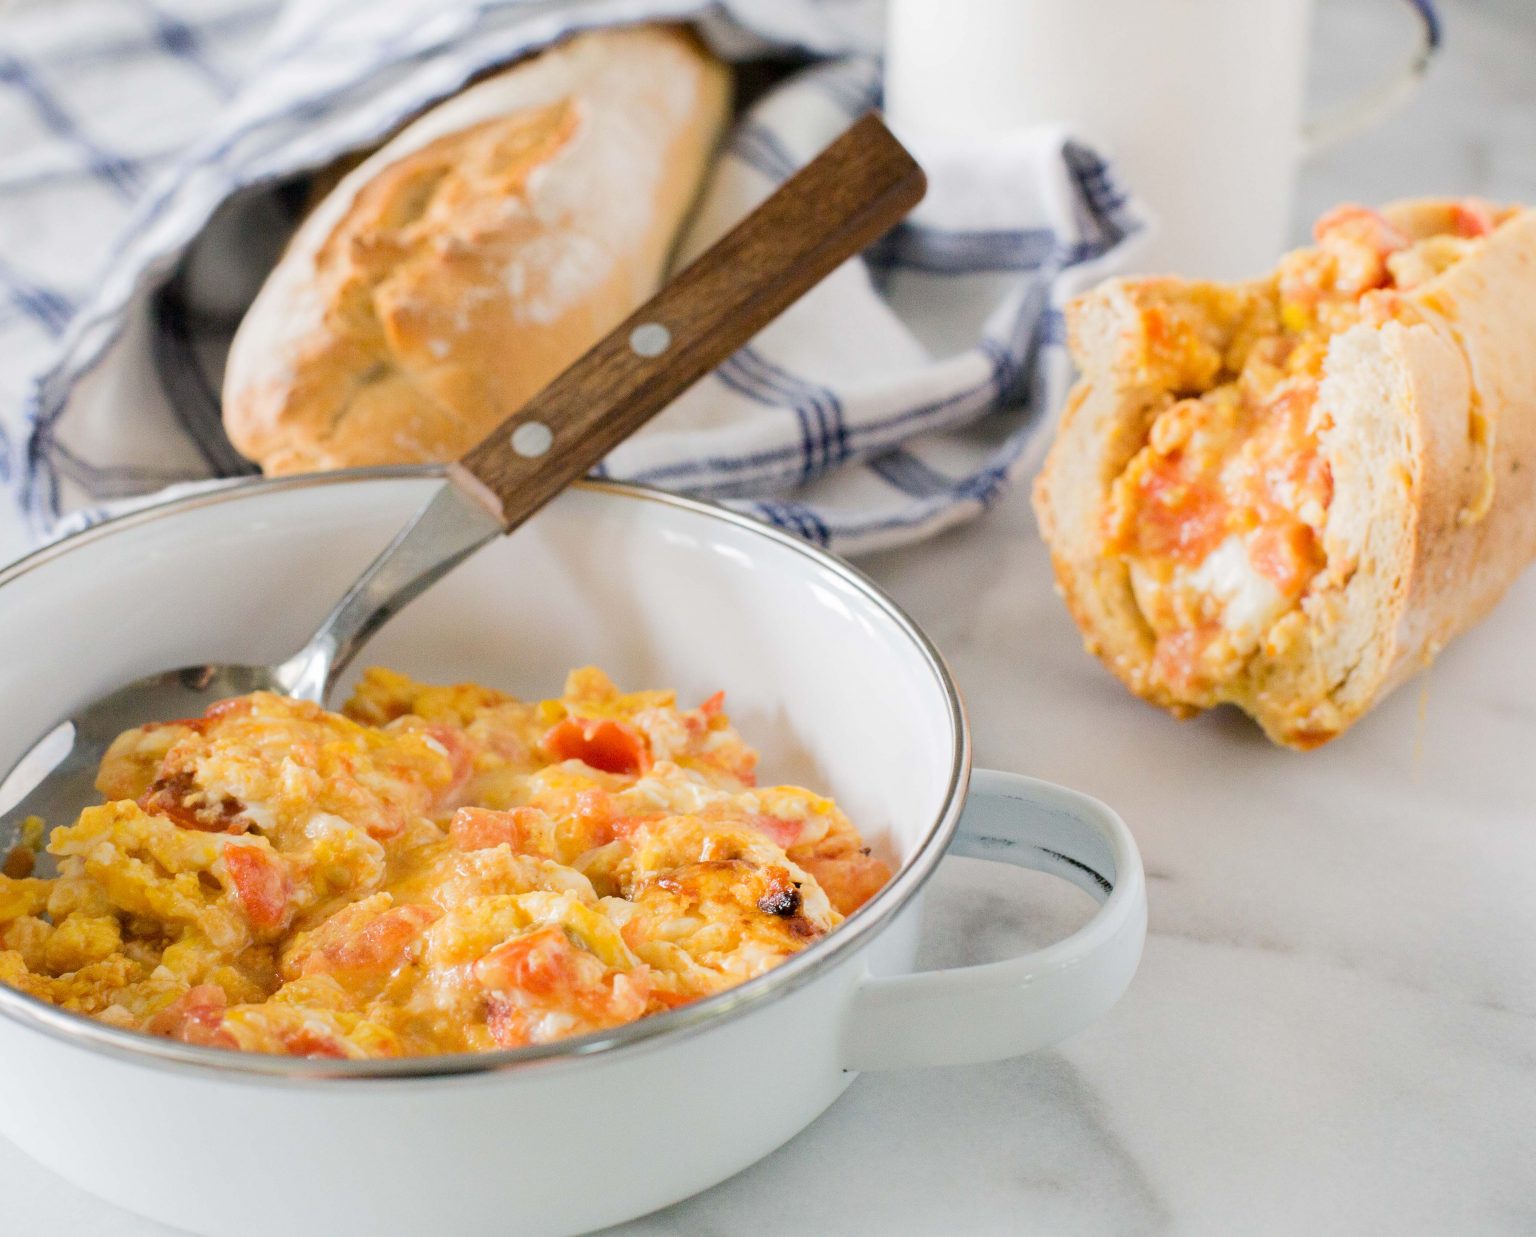 Scrambled eggs with cheese and tomatoes - Pilar's Chilean Food & Garden